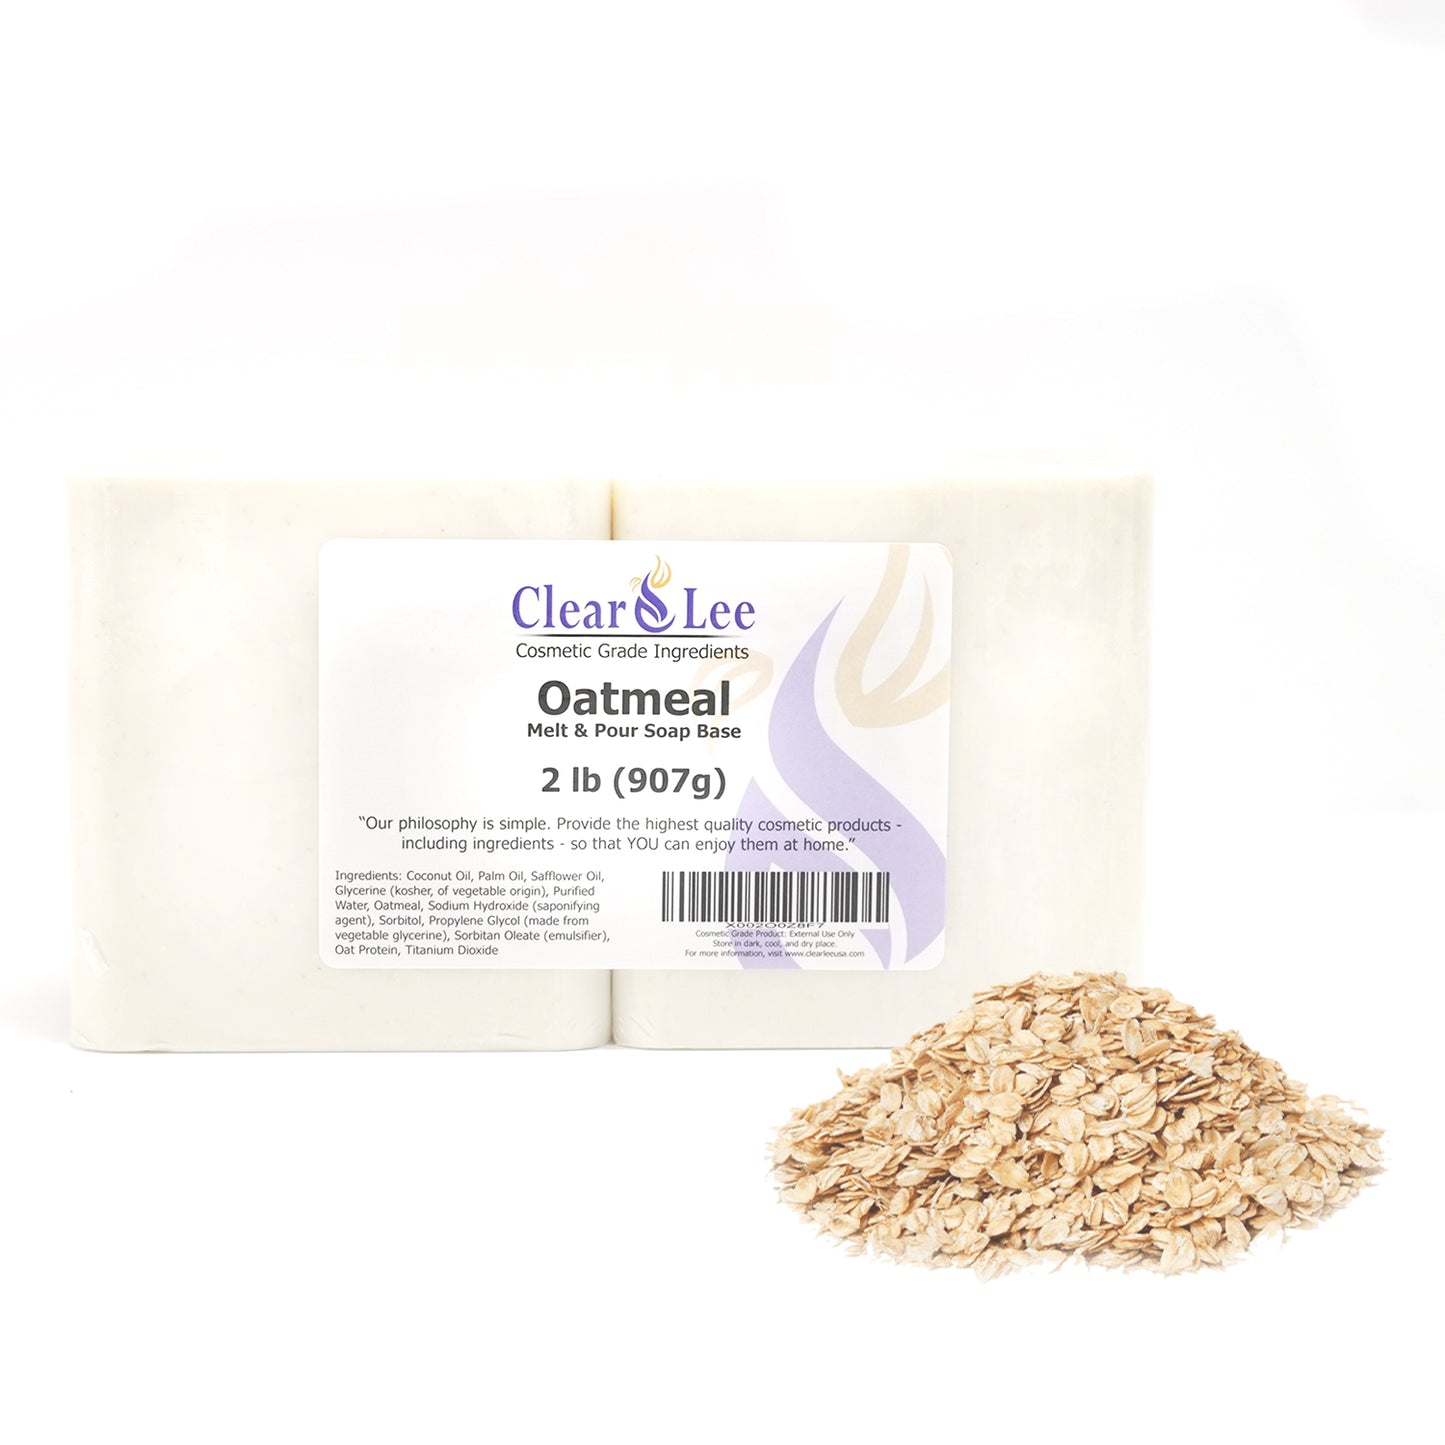 Hemp Seed Oil Melt & Pour Soap Base – ClearLee